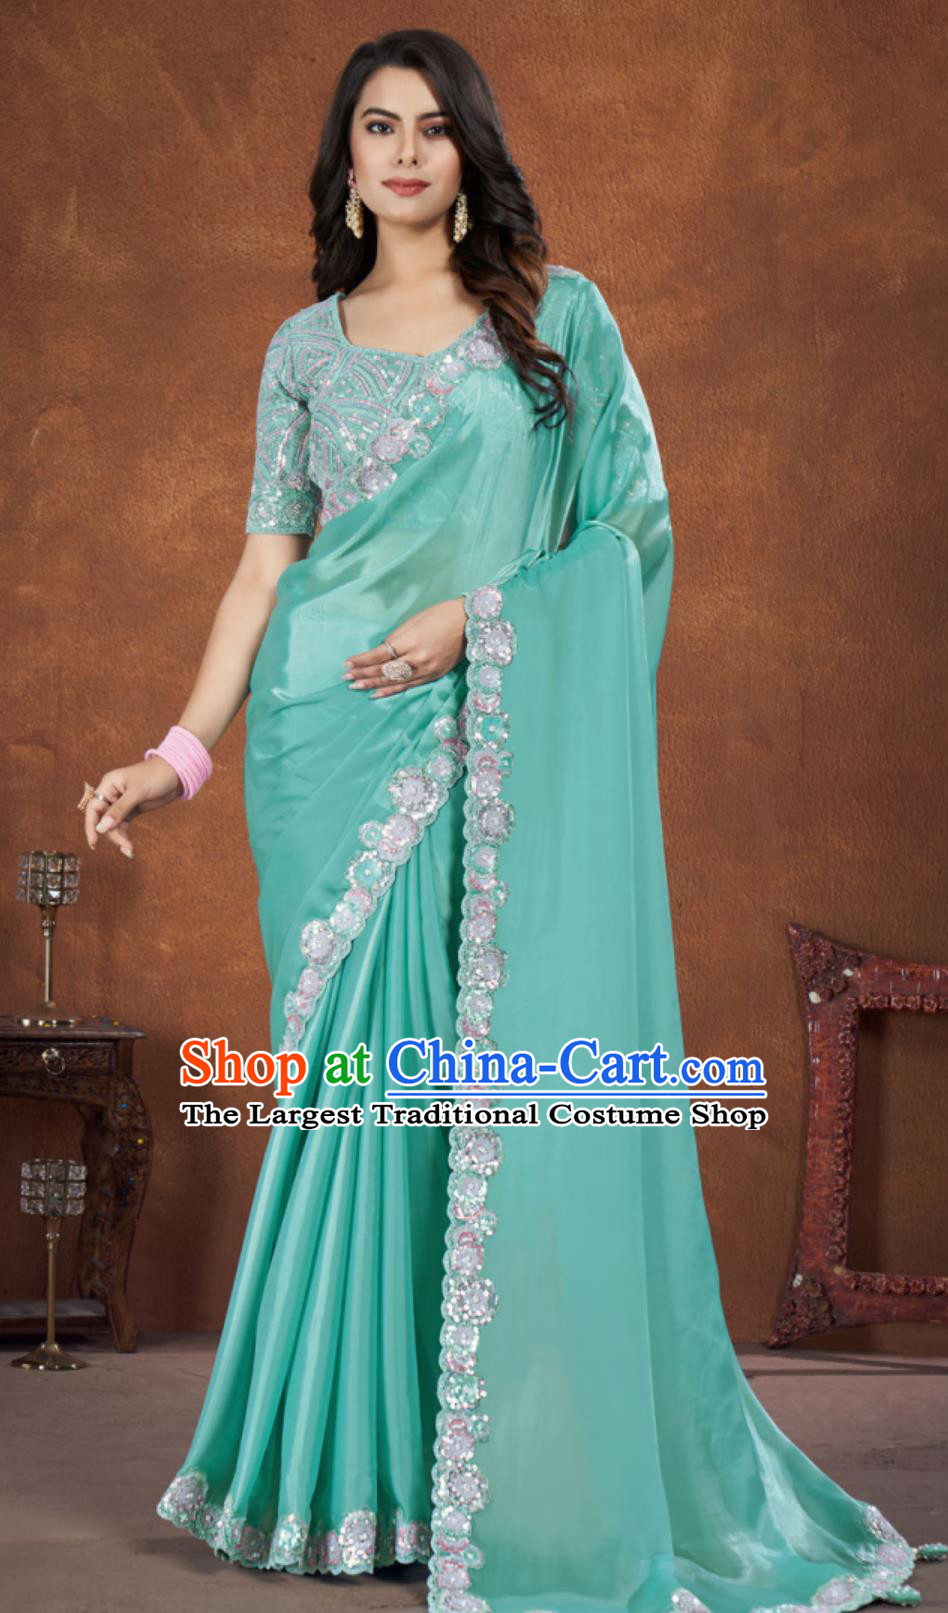 Indian Traditional Women Clothing Embroidery Lake Blue Dress Festival Sari National Costume